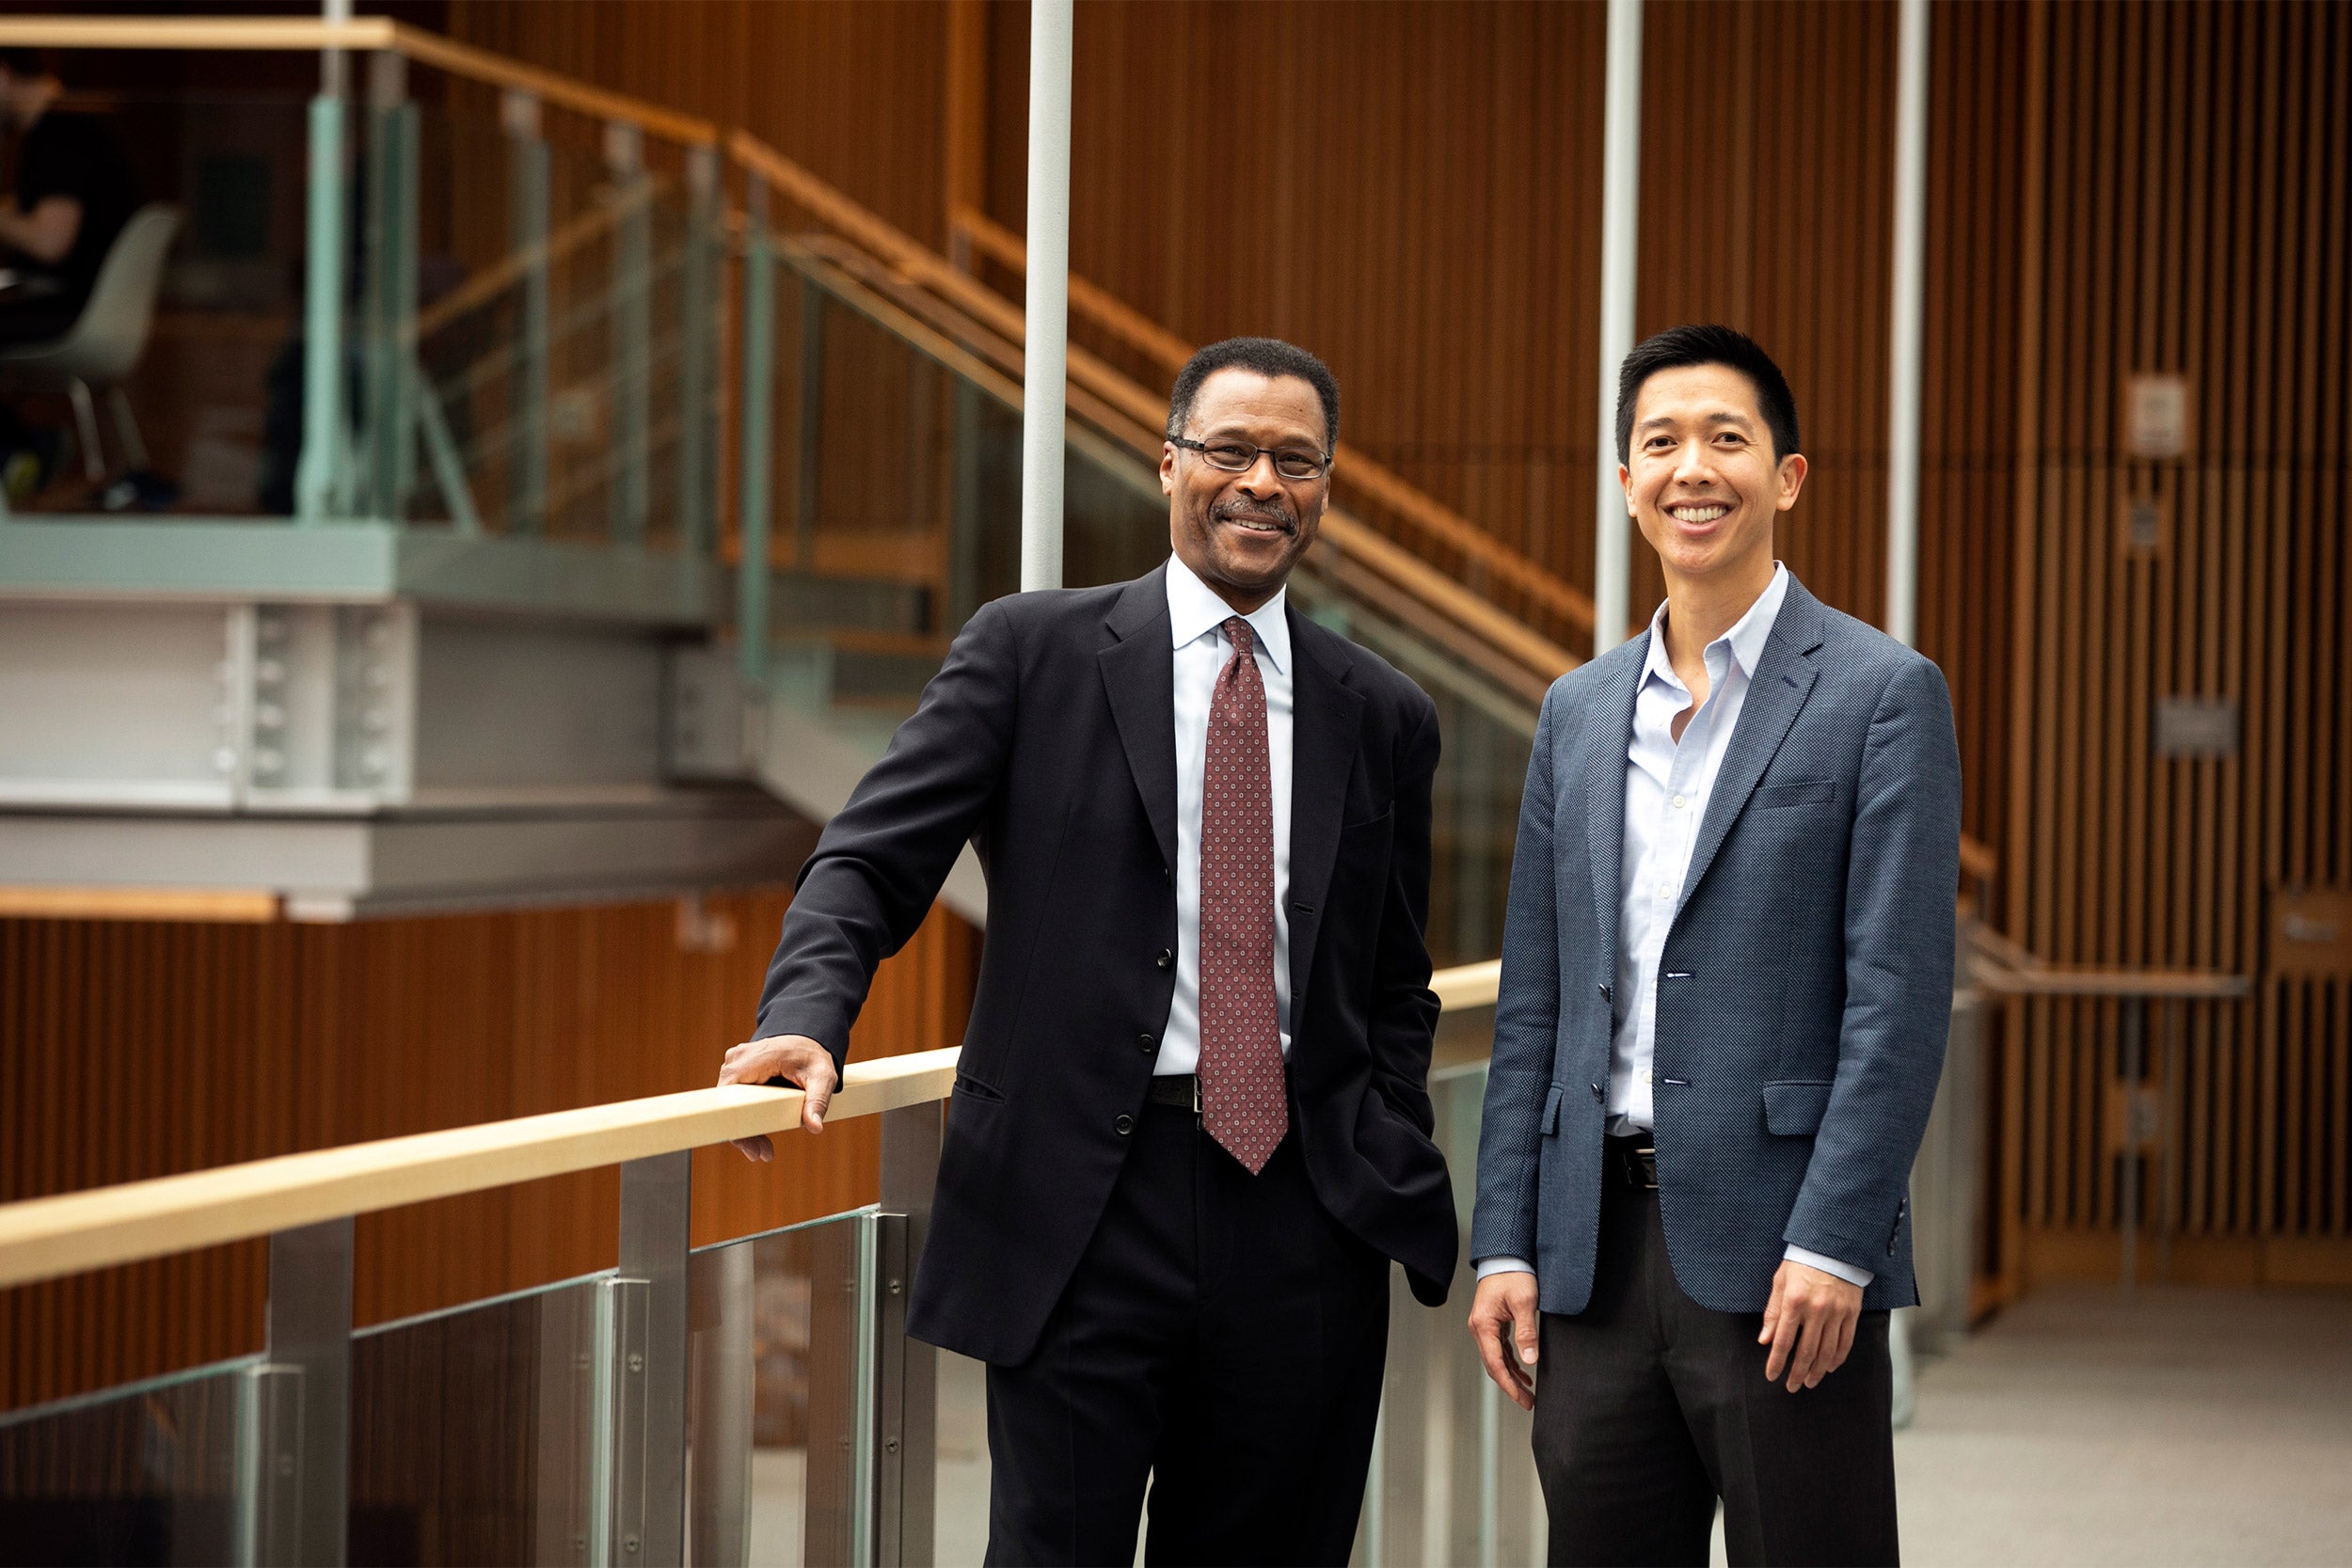 John Silvanus Wilson and Andrew Ho pictured at Smith Campus Center.